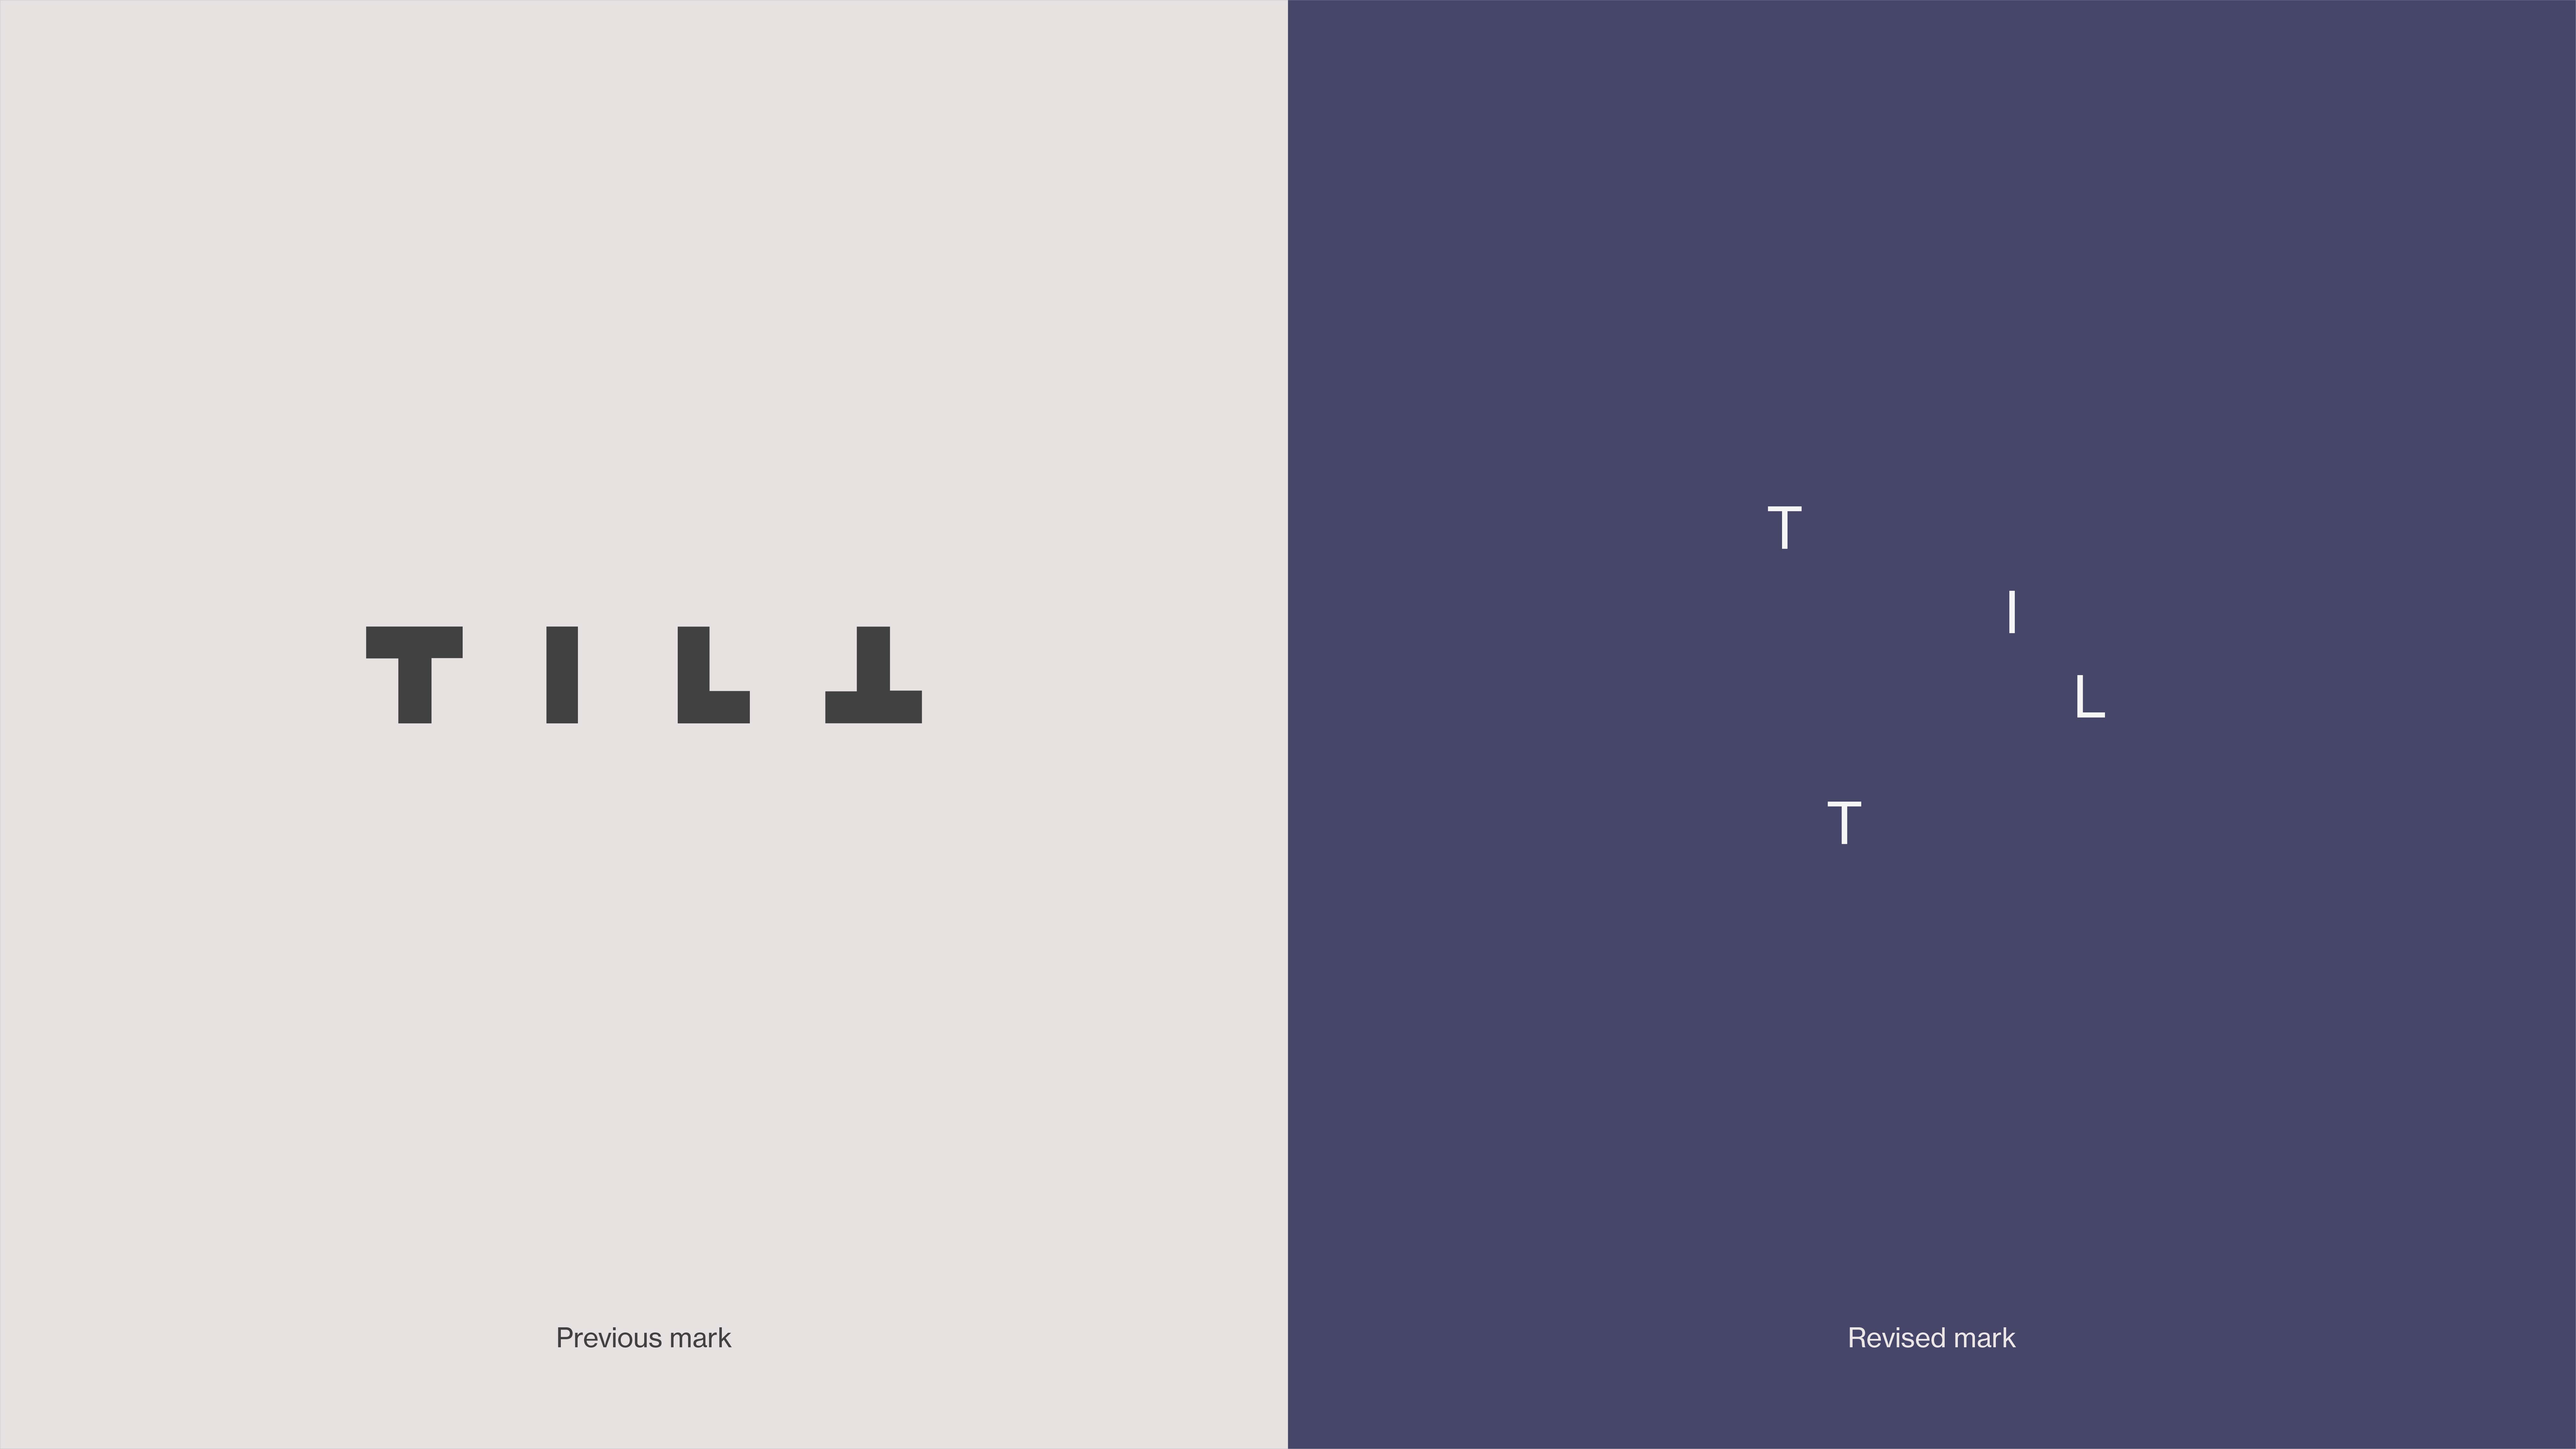 A comparison of the old TILT logo verses the new. The old logo says "TILT", but the last "T" is upside-down and it is set in a bold sans-serif font. The new logo is made from the letters in "TILT" which are spread apart, up and down, with lots of room between each letter.